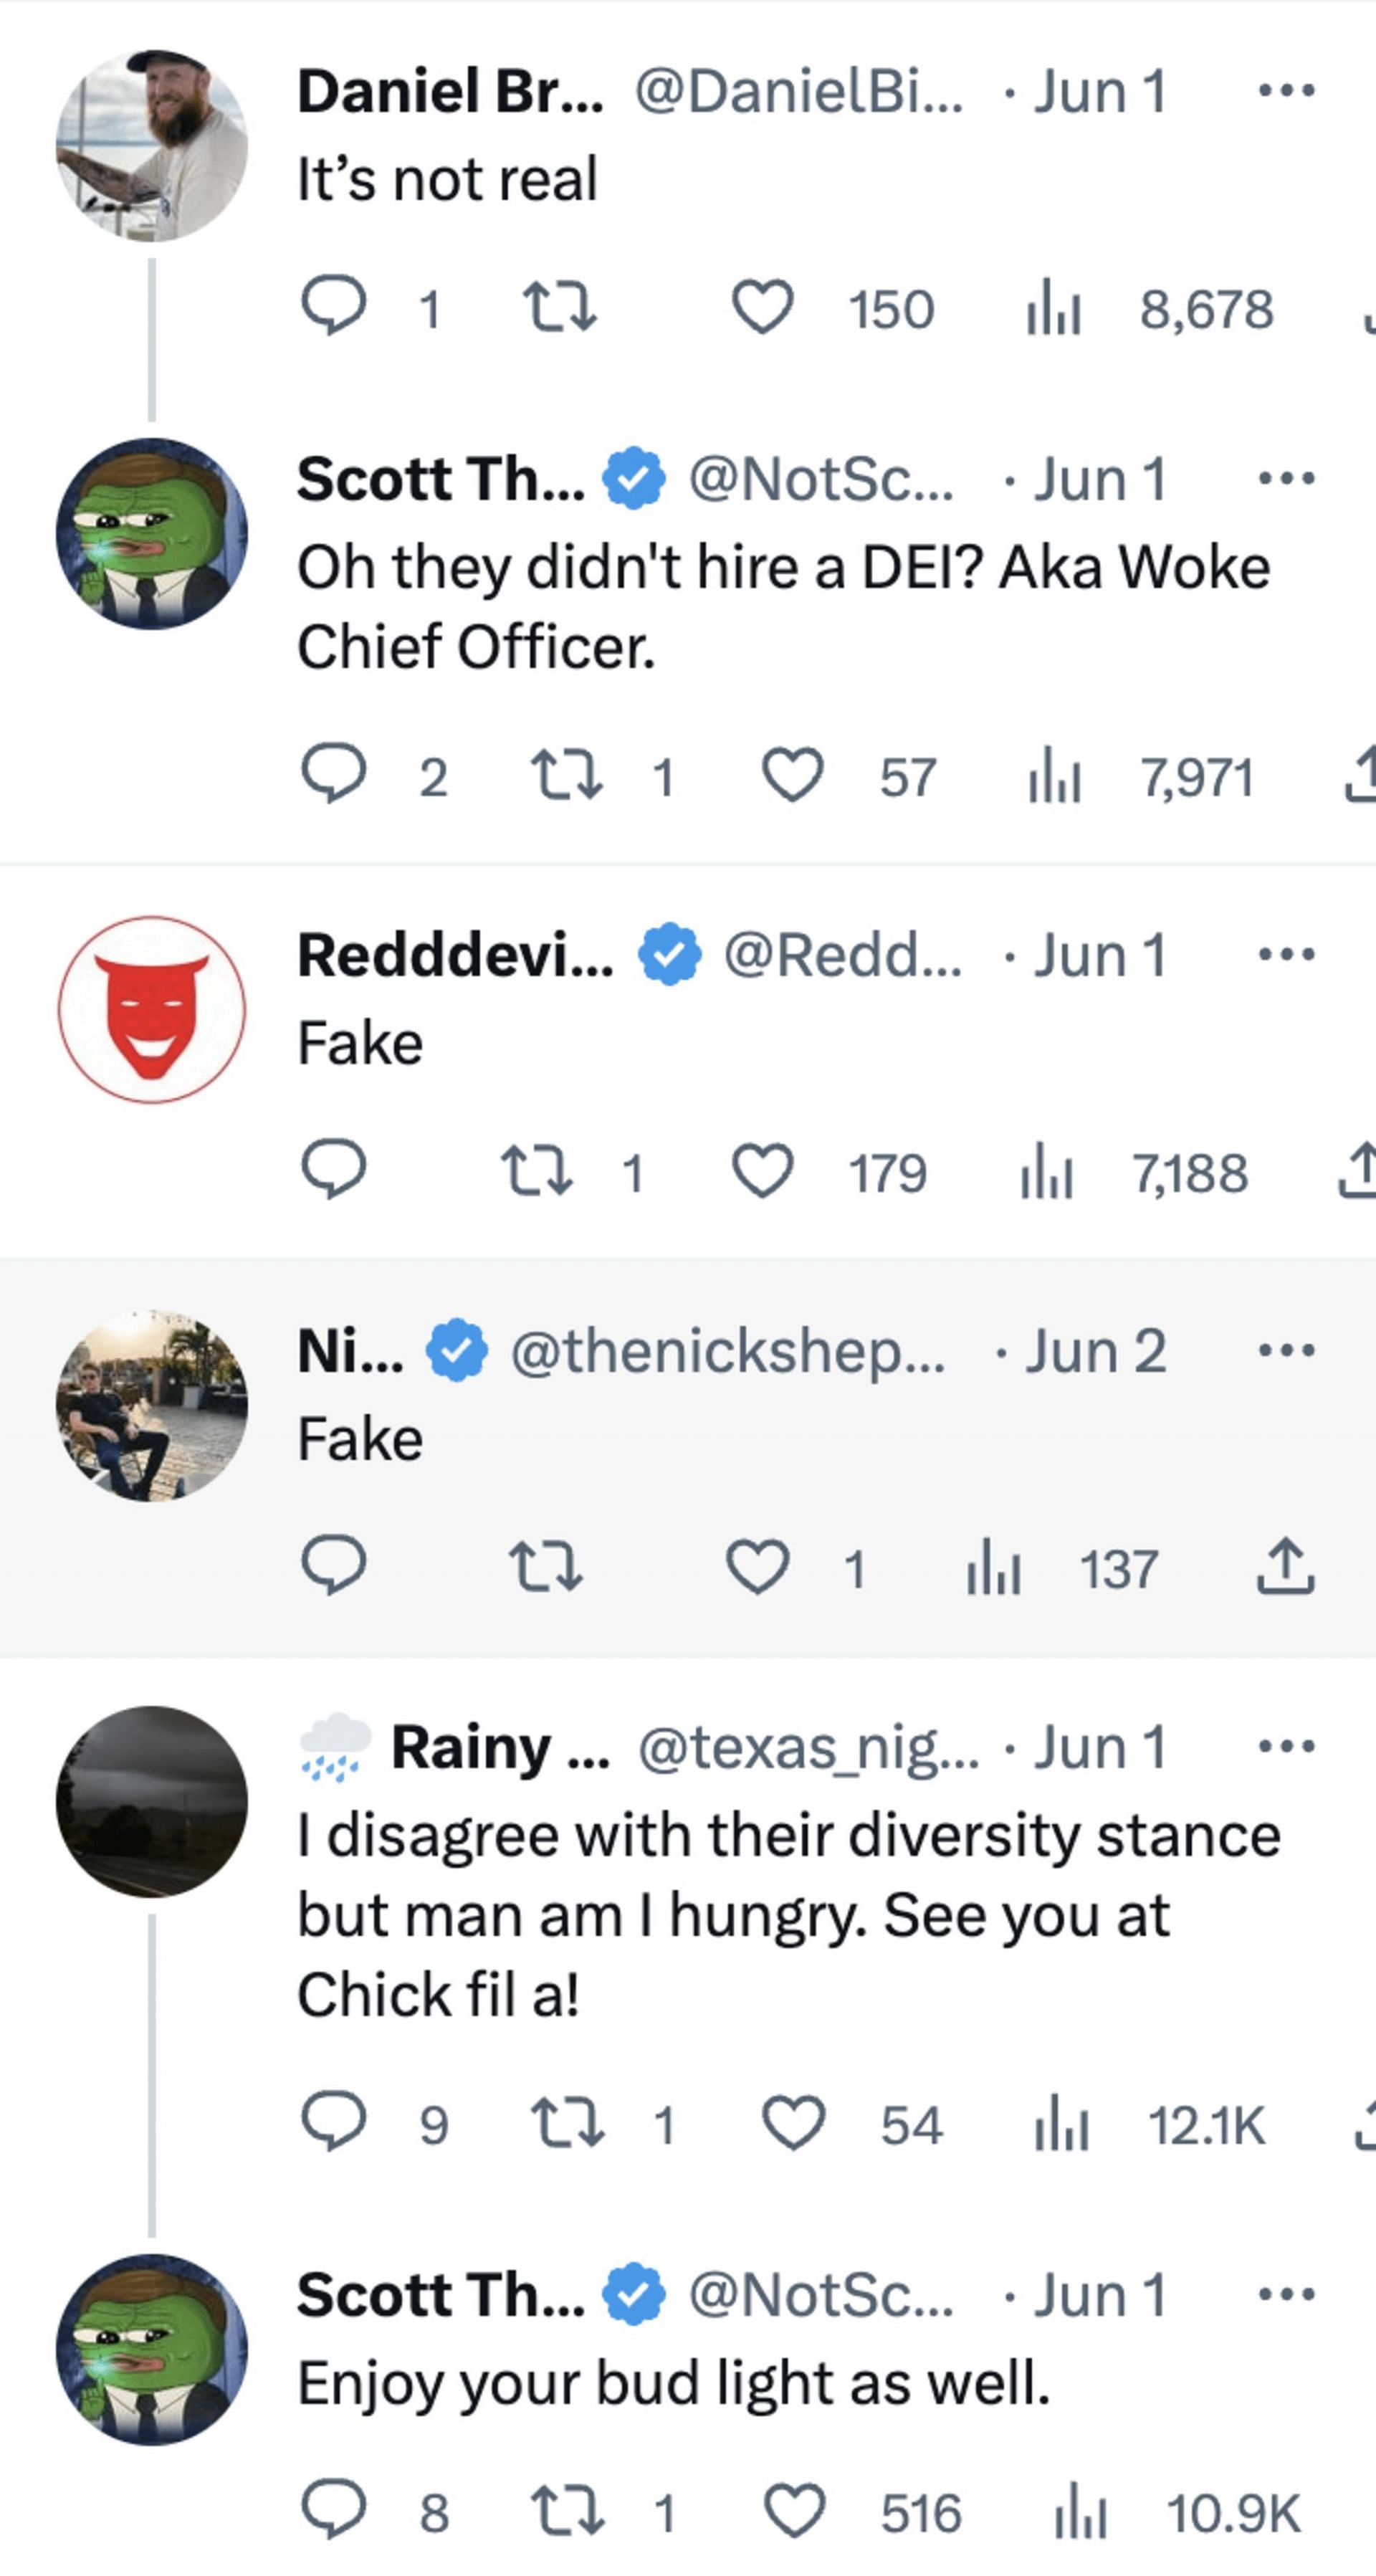 Social media users reacted to the fake news of the fast food chain changing its logo to a LGBTQ-themed one ahead of the Pride Month. (Image via Twitter)